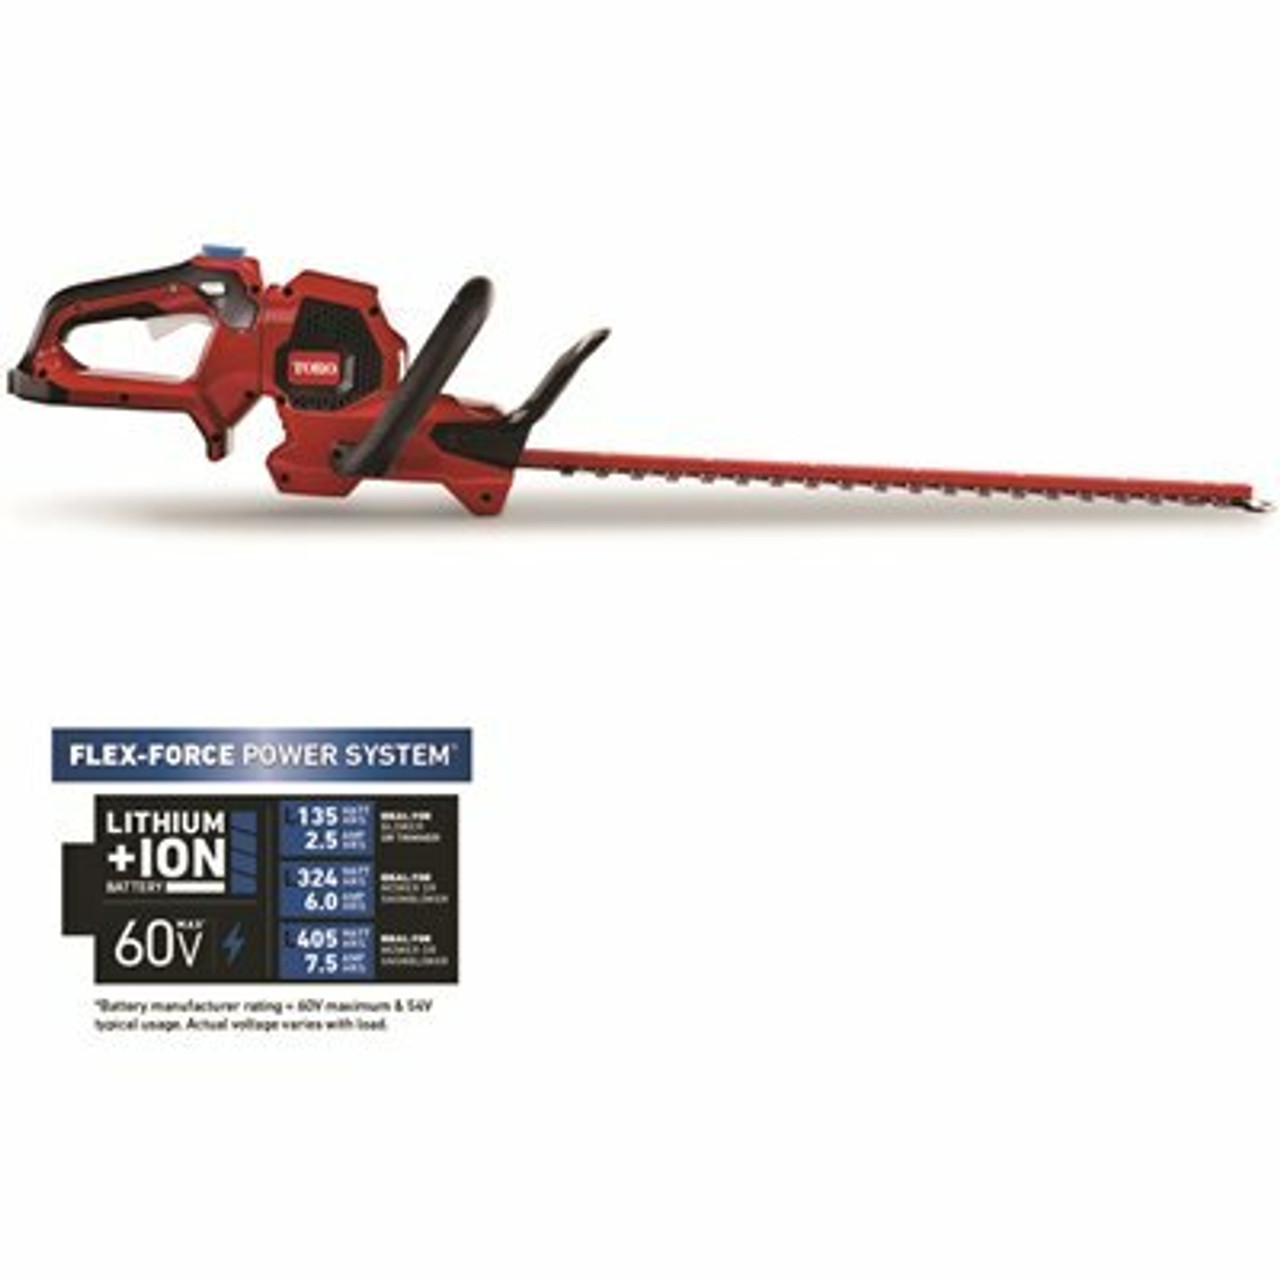 Toro Flex-Force 24 In. 60-Volt Max Lithium-Ion Cordless Hedge Trimmer (Bare-Tool)